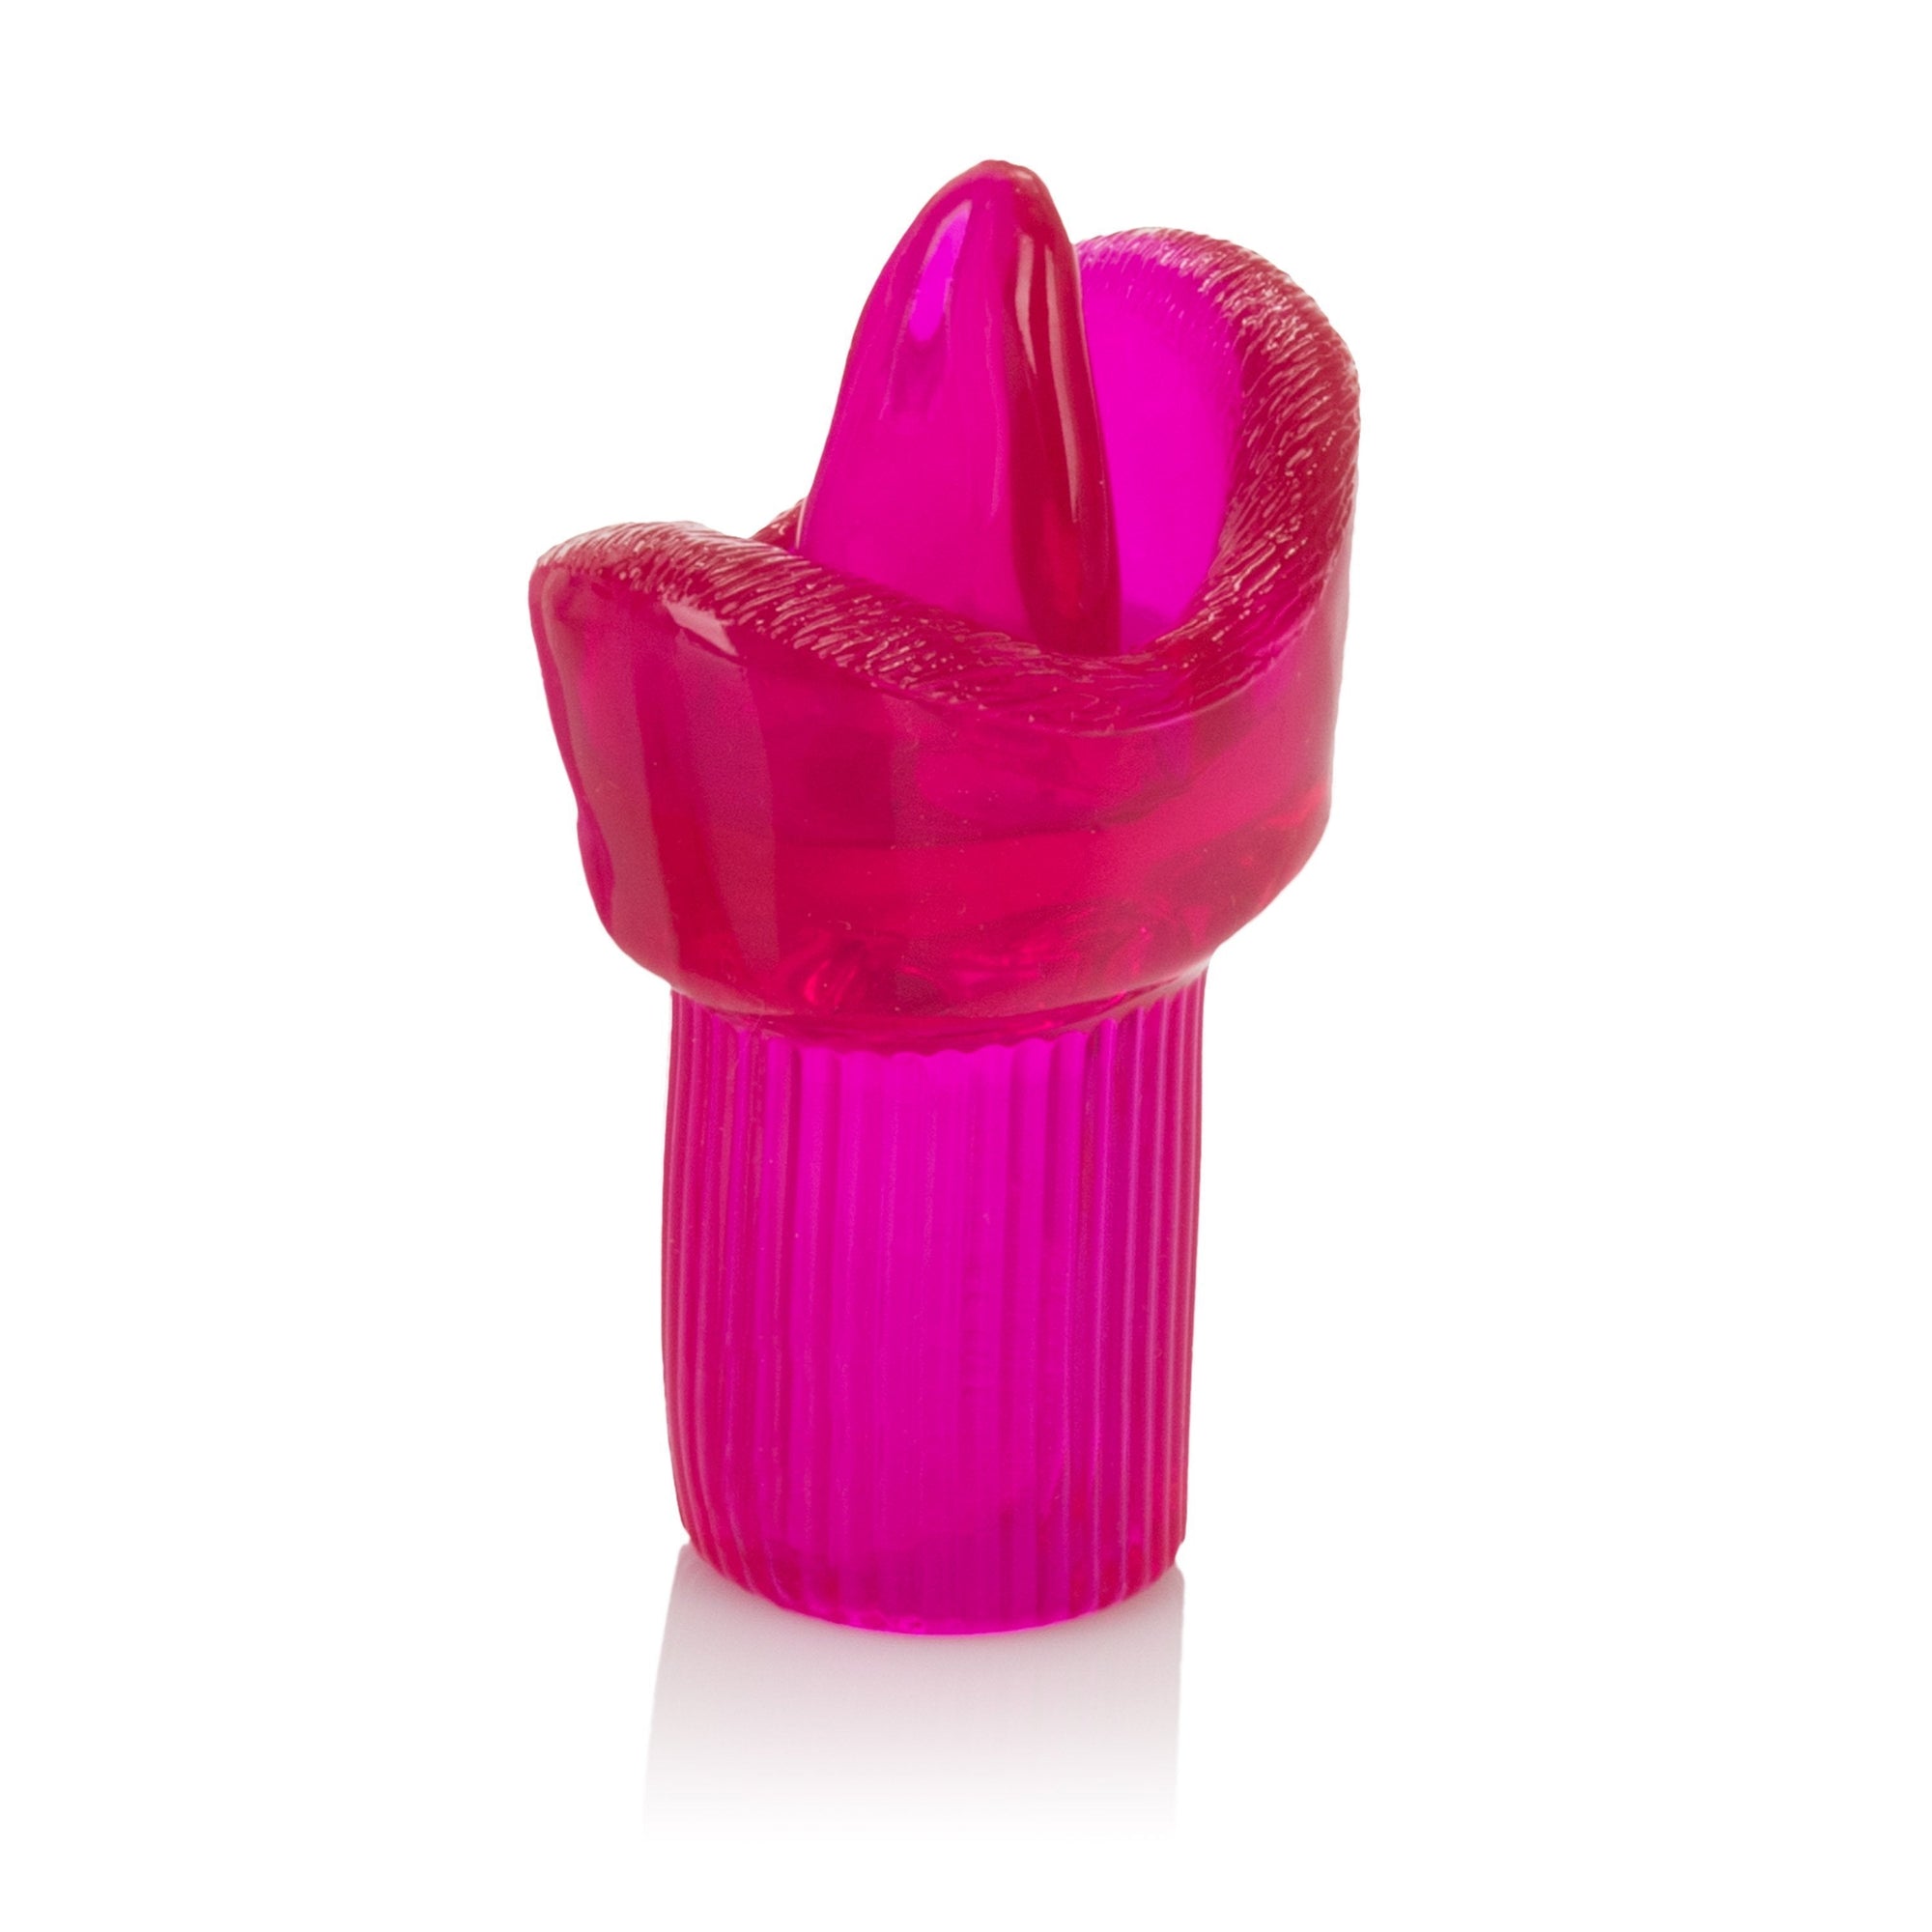 California Exotics - Hers Clit Massagers Kit (Pink) -  Clit Massager (Vibration) Non Rechargeable  Durio.sg